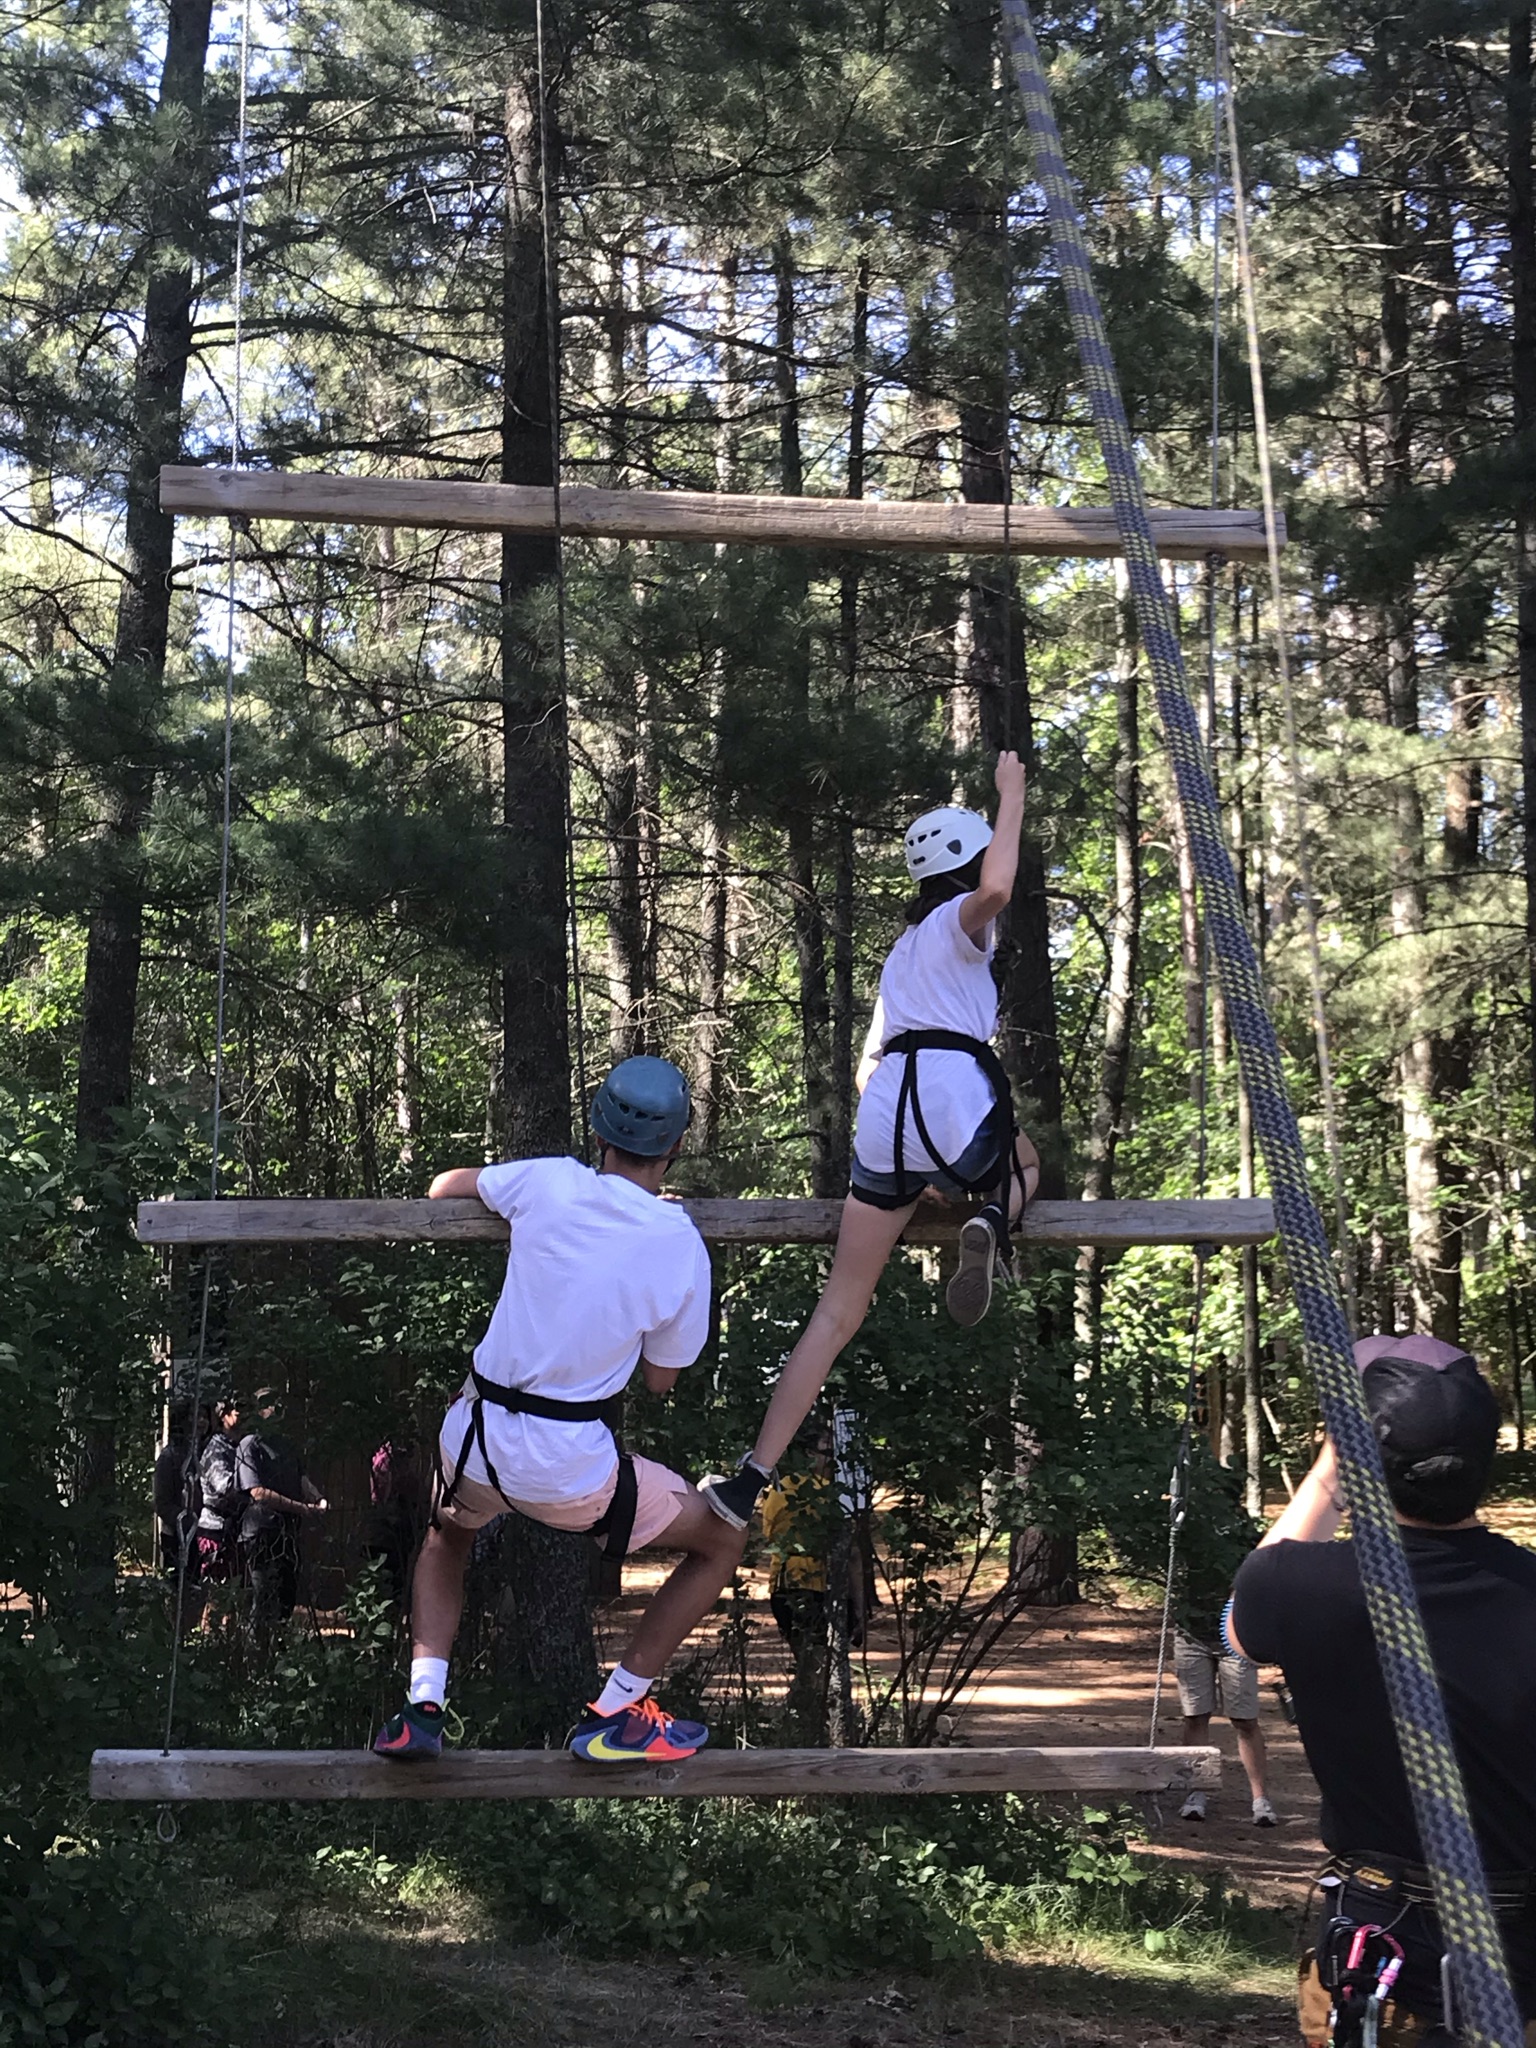 Students climbing up a wooden ladder in a forest